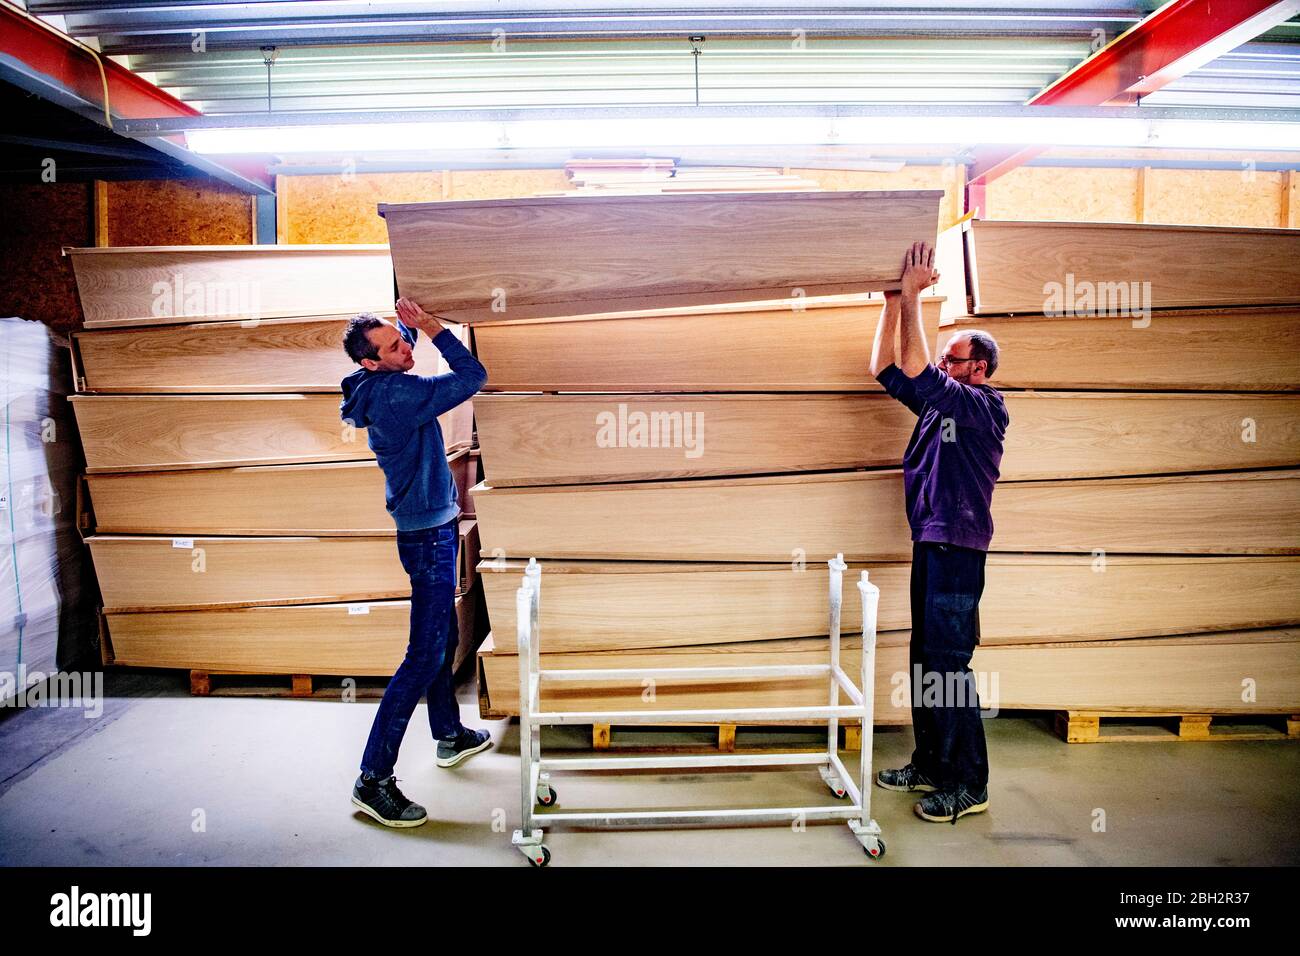 Gendringe, Netherlands. 23rd Apr, 2020. Employees carrying a casket at Tomba coffin maker.As the Coronavirus pandemic ravages Netherlands one coffin design firm south of Gendering has been busy delivering hundreds of caskets per week to double the usual production capacity. Coffin makers and the funeral industry at large are working hard. Credit: SOPA Images Limited/Alamy Live News Stock Photo